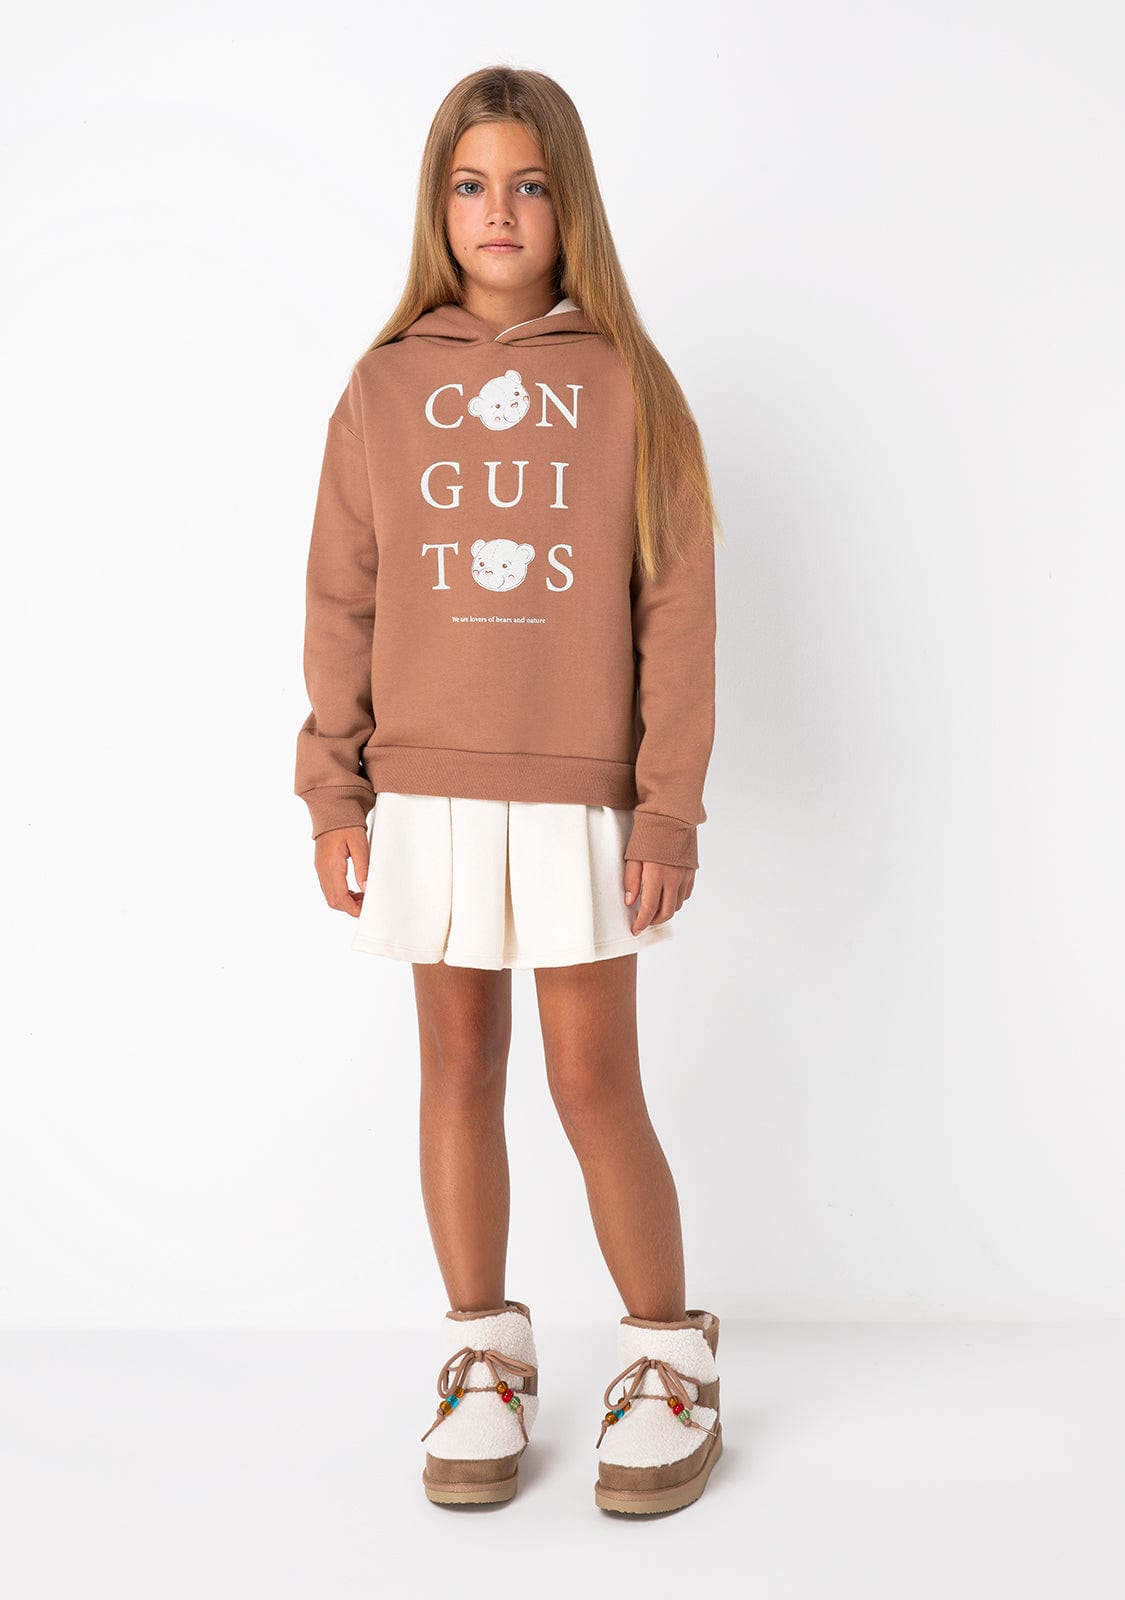 CONGUITOS TEXTIL Clothing Girl's Brown Conguitos Hoodie